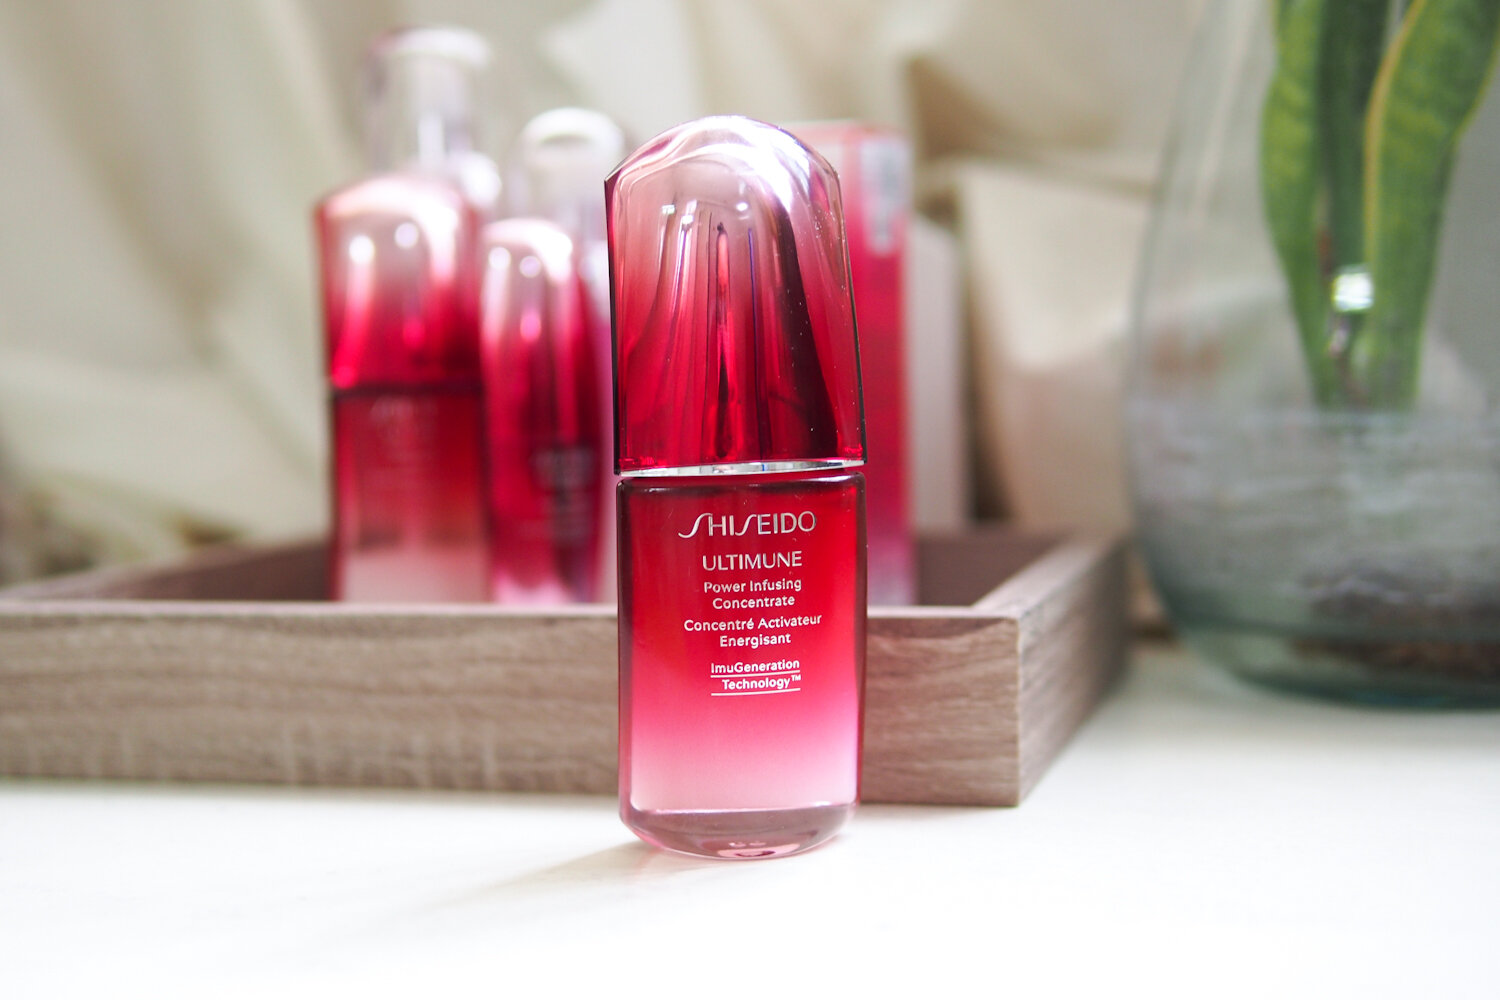 Why Shiseido Ultimune is my HG serum + a review of the new Ultimune ...